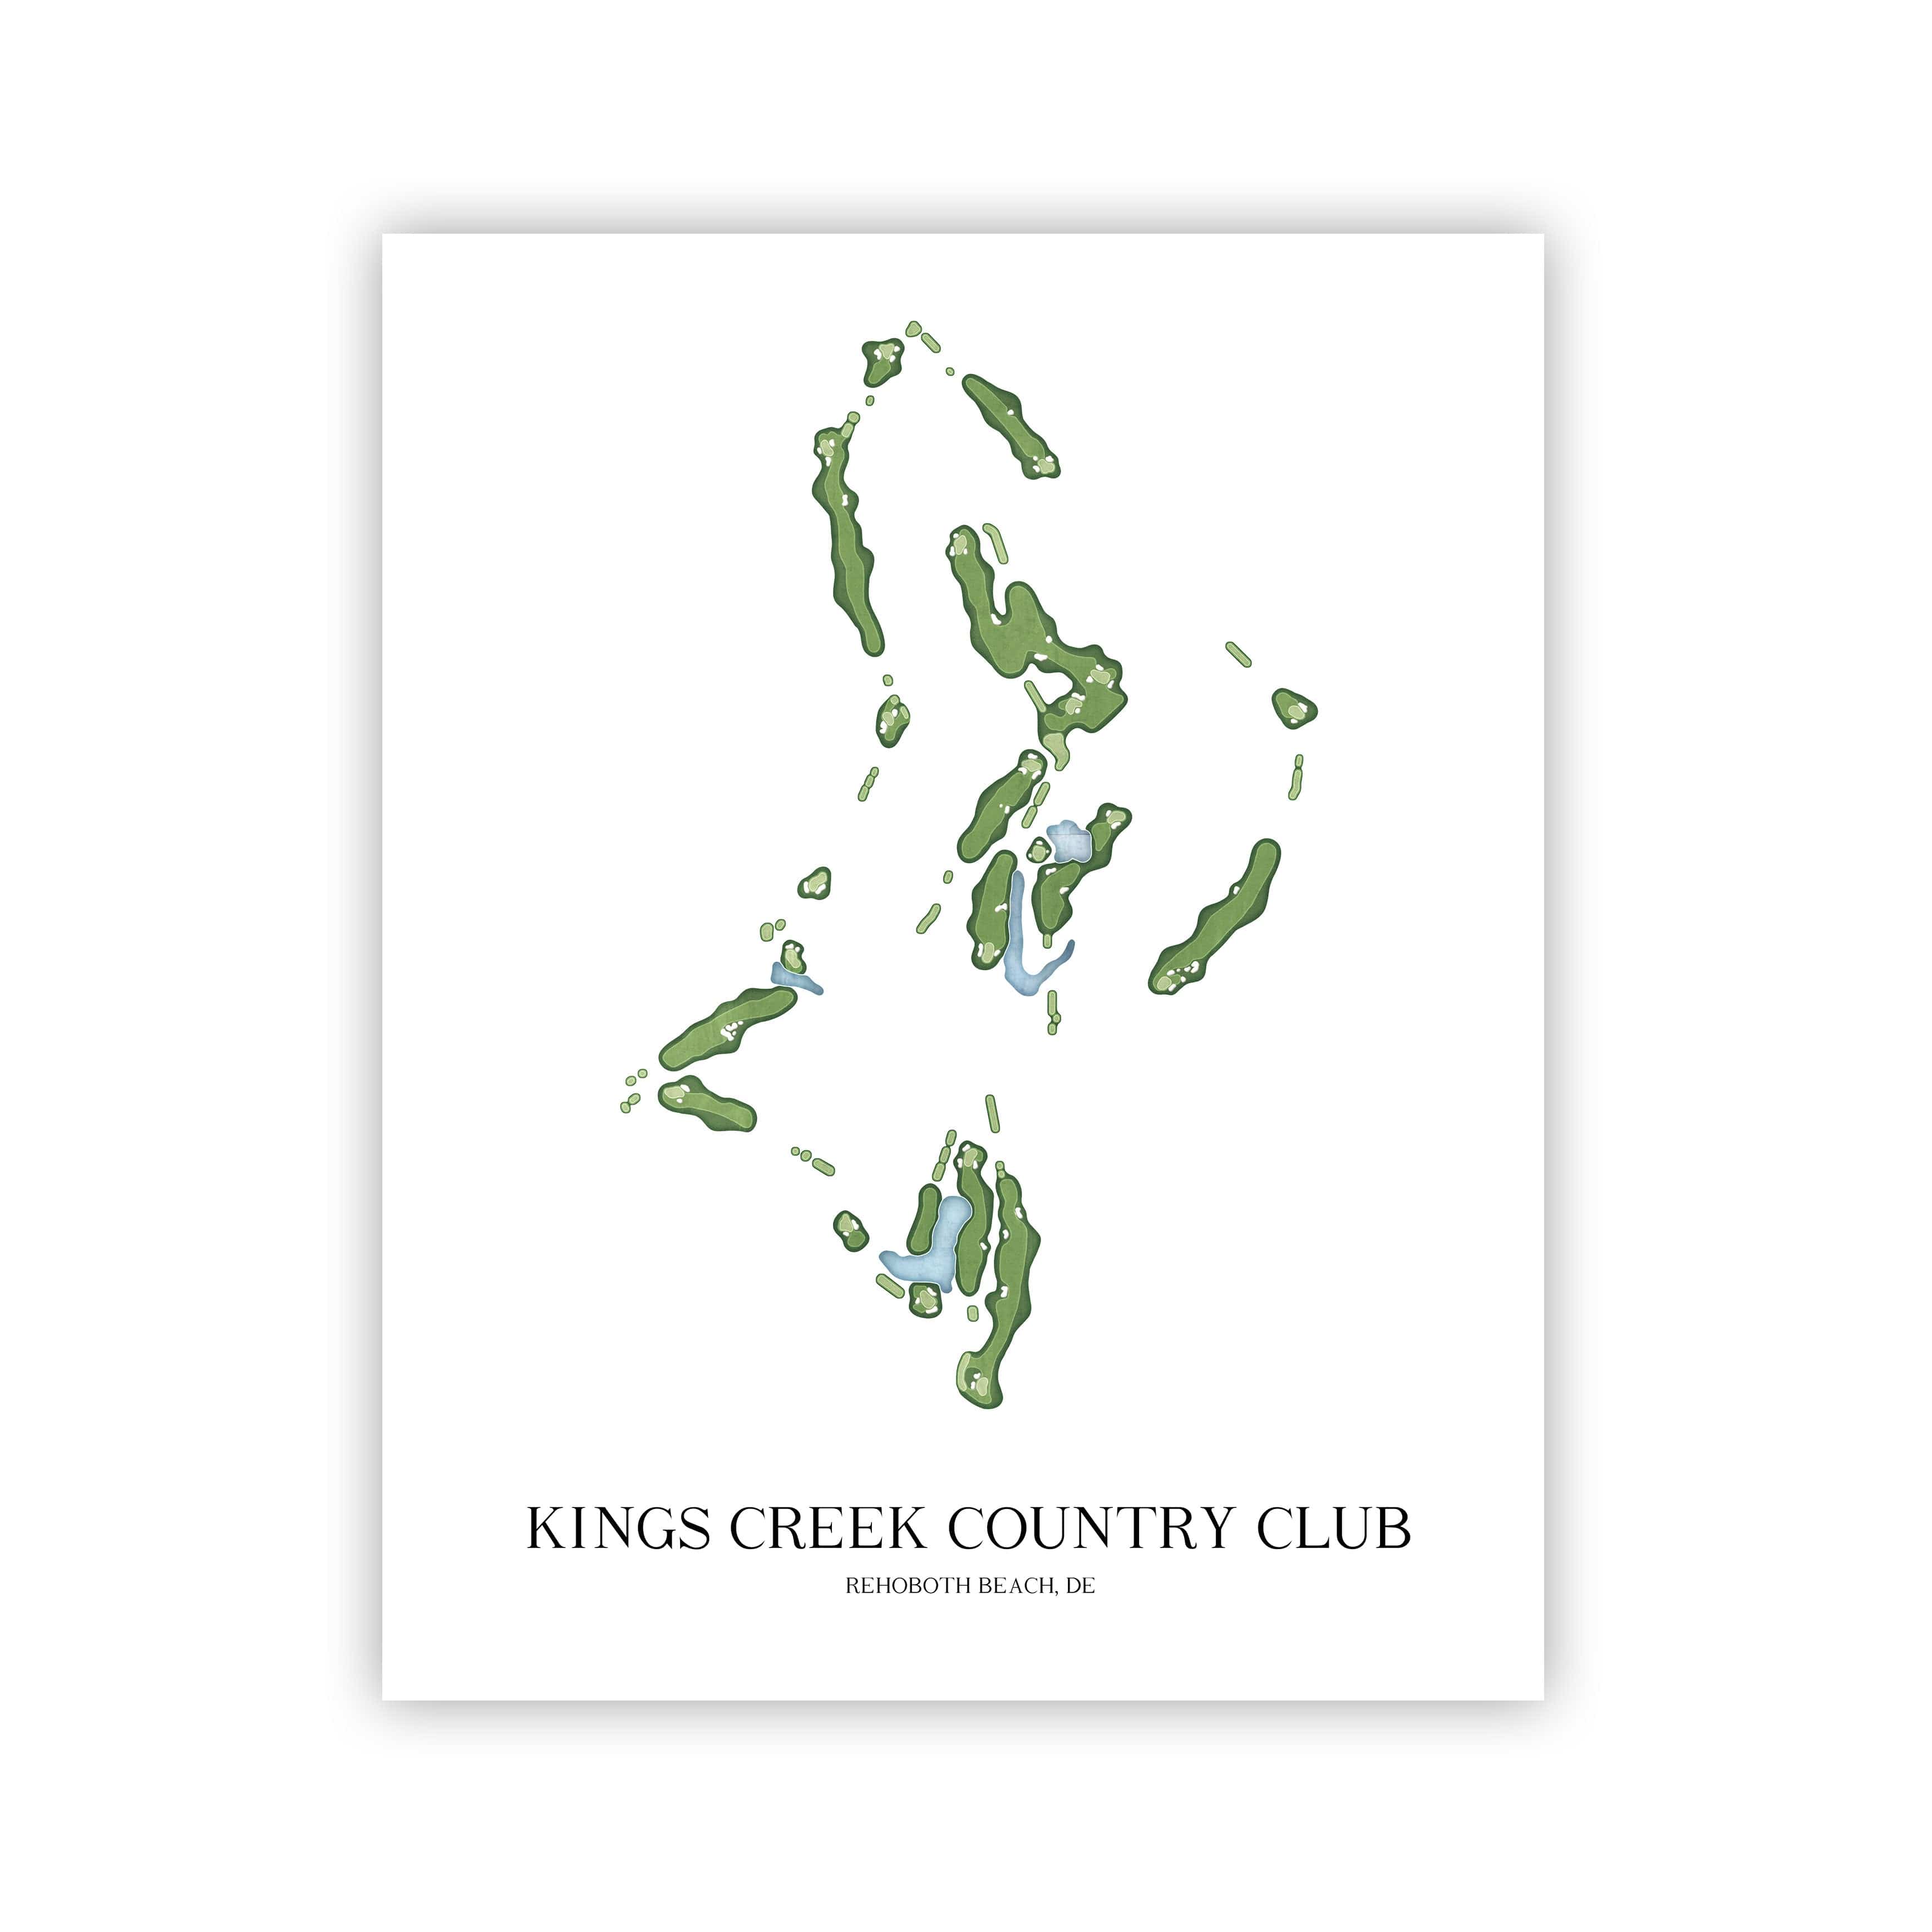 The 19th Hole Golf Shop - Golf Course Prints -  Kings Creek Country Club Golf Course Map